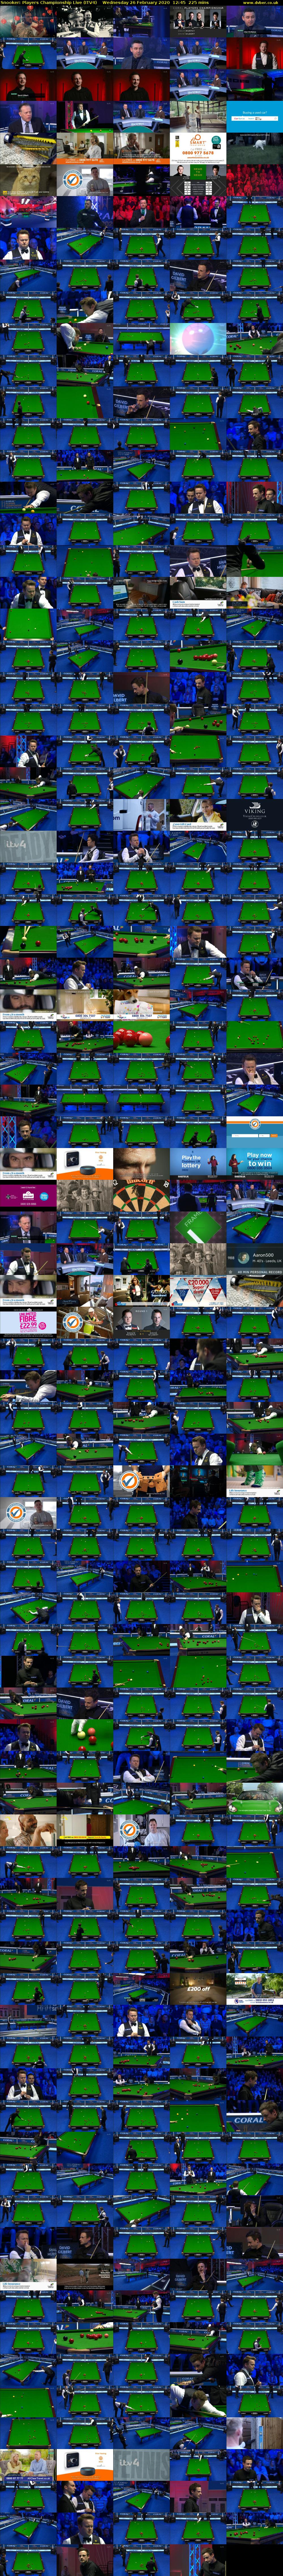 Snooker: Players Championship Live (ITV4) Wednesday 26 February 2020 12:45 - 16:30